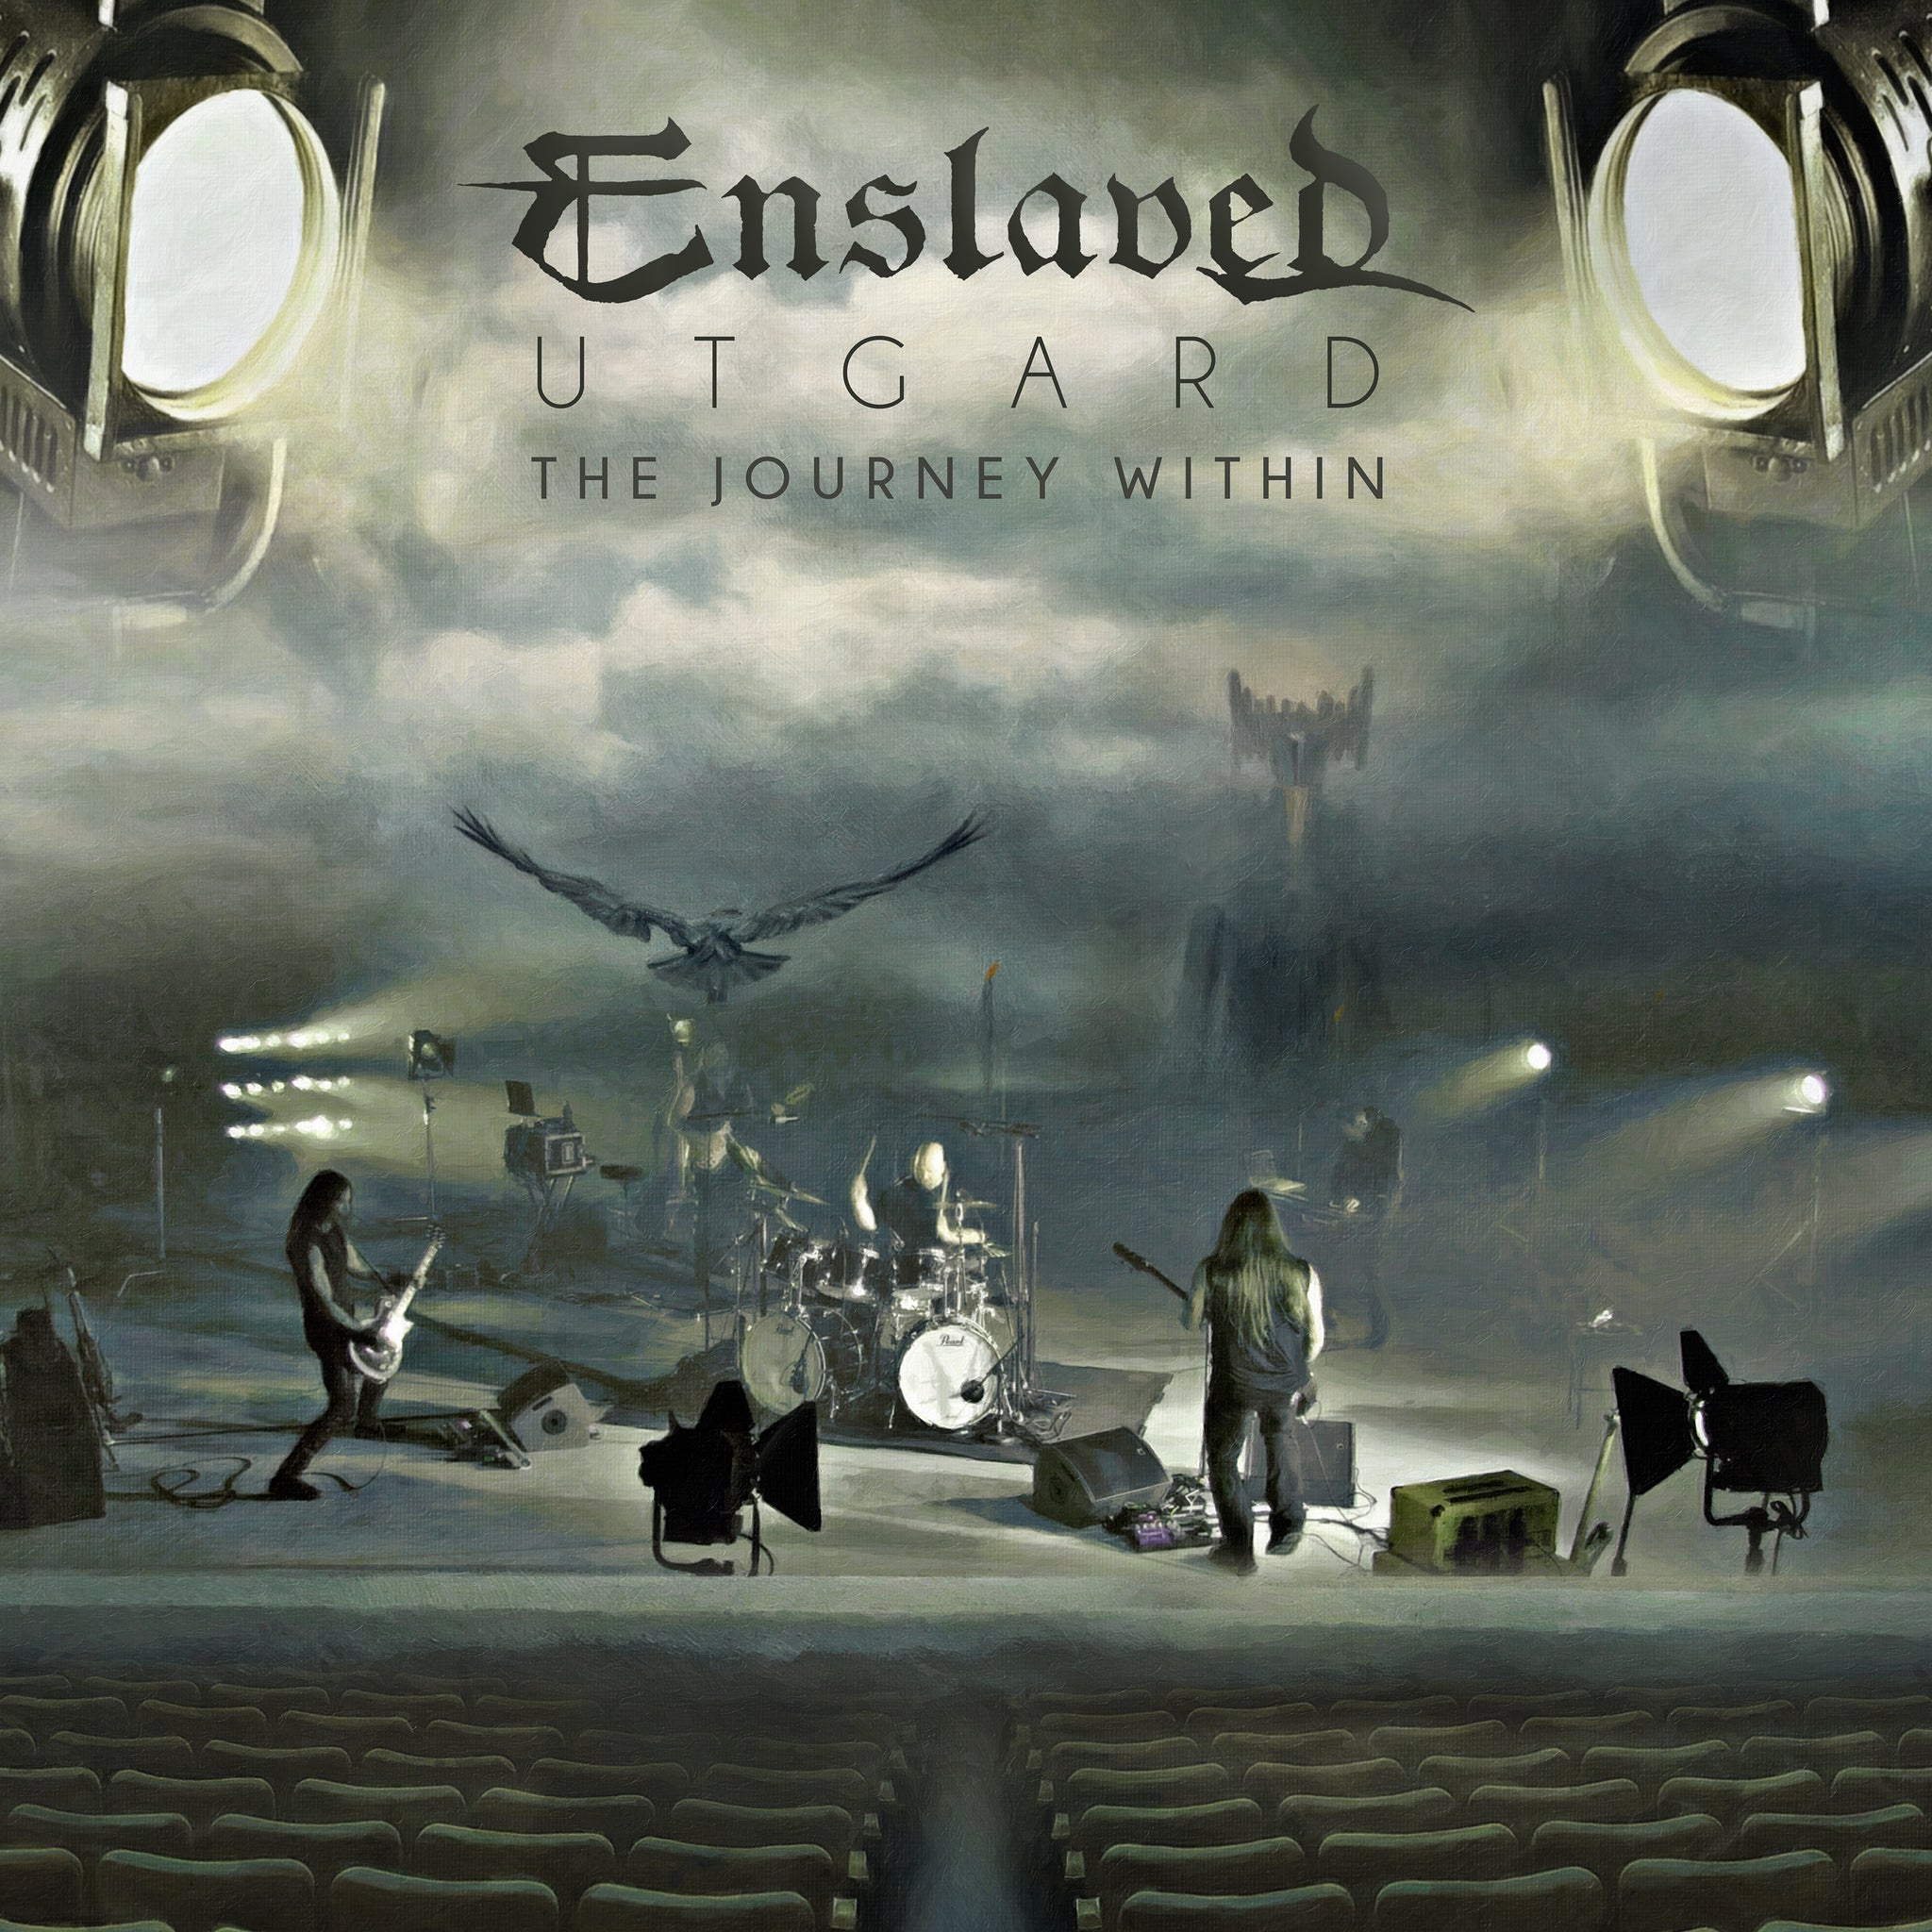 Enslaved - Utgard - The Journey Within (Cinematic Tour 2020) Video on Demand